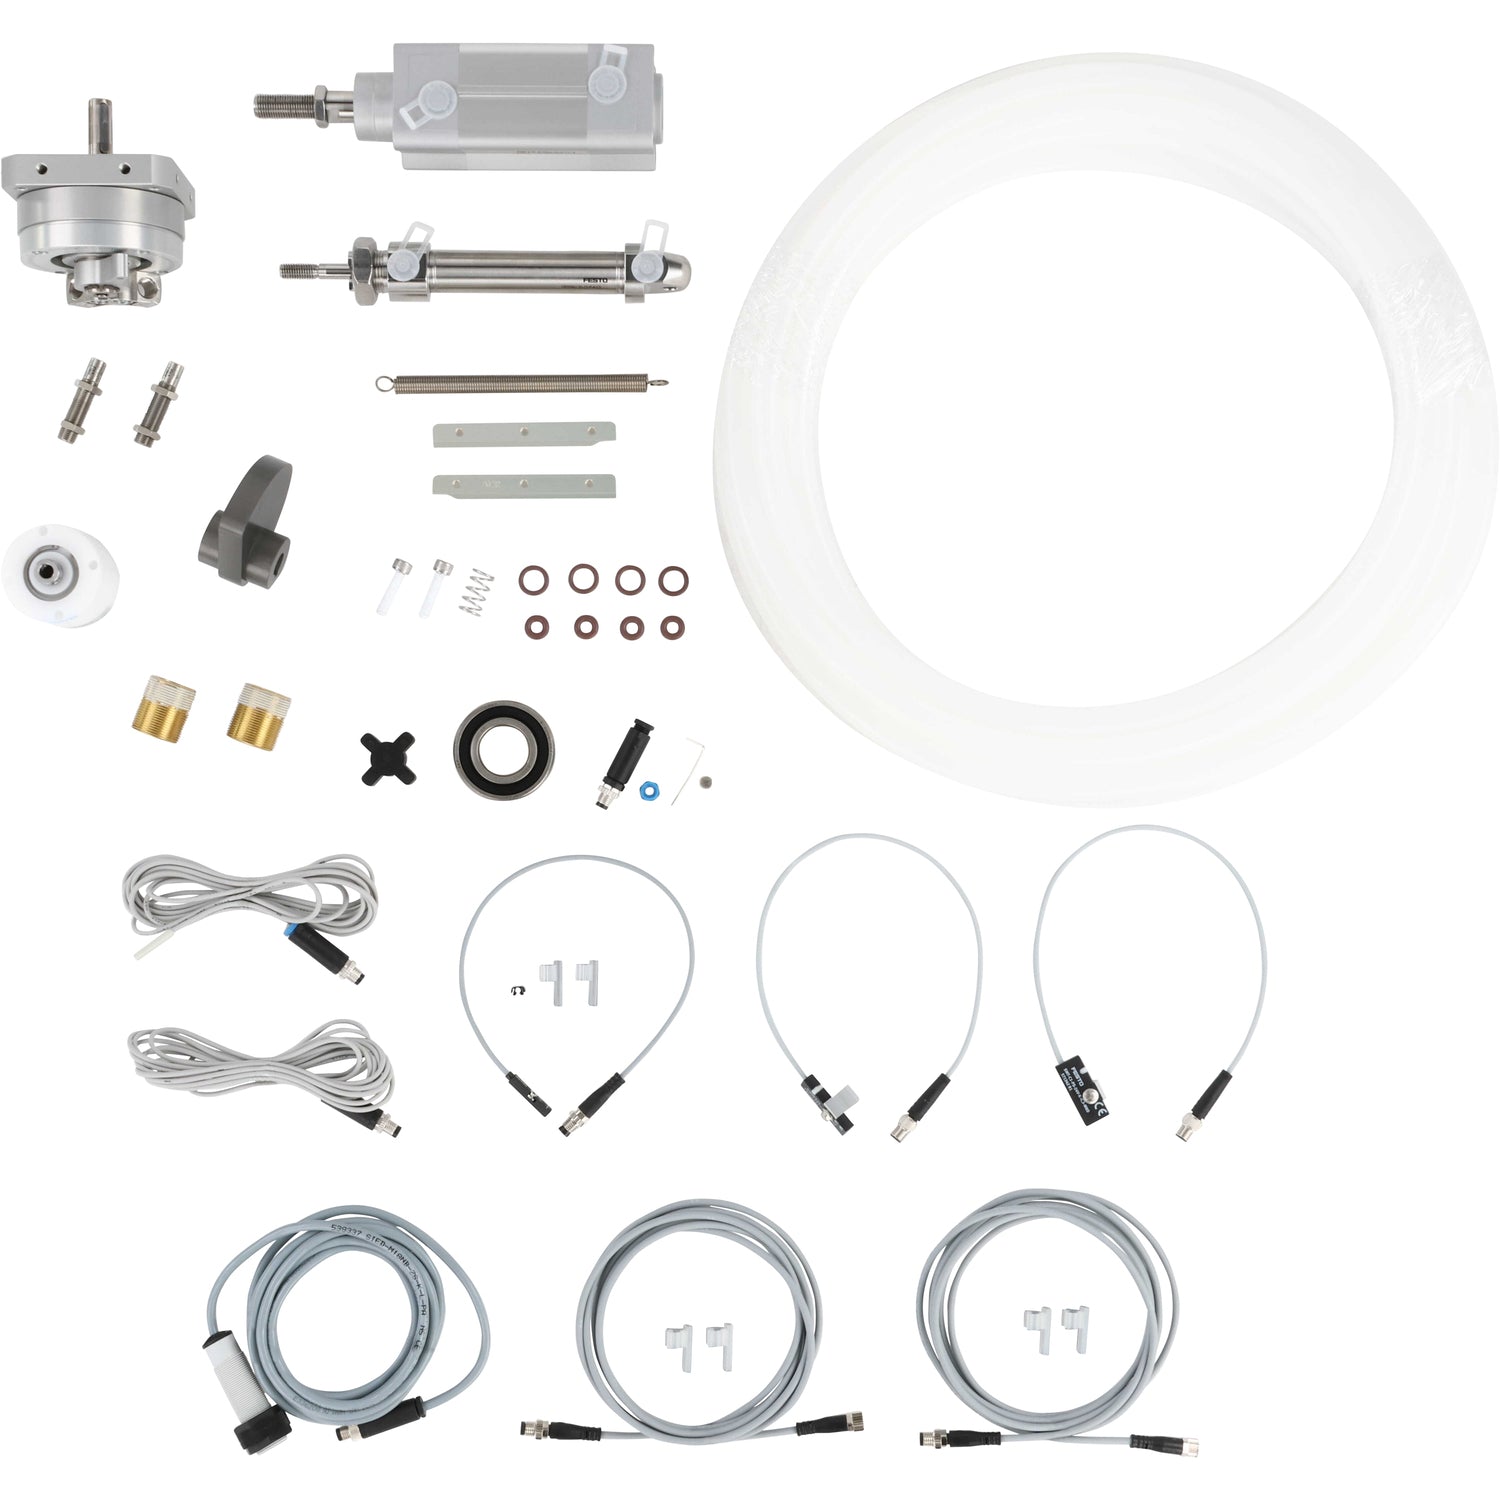 An assortment of parts that include pneumatic cylinders, sensor cables, o-rings, product tubing, springs, bearings and a rotary cam. Parts shown on a white background.